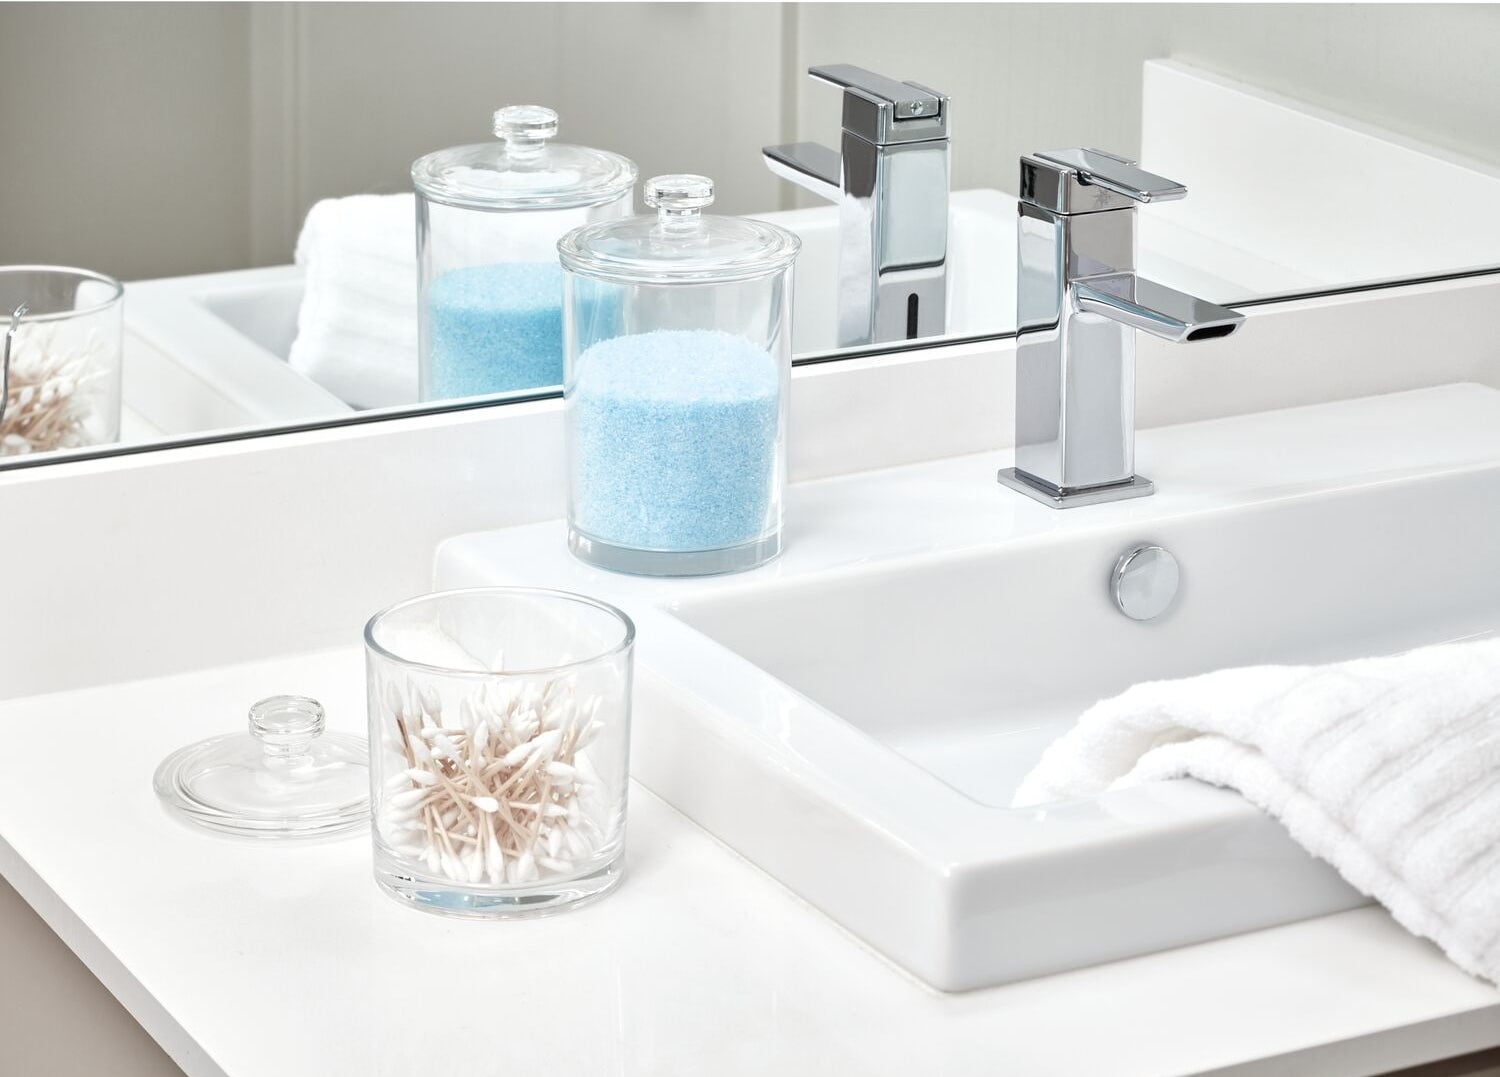 Bathroom sink with glass jars containing bath products and a white towel